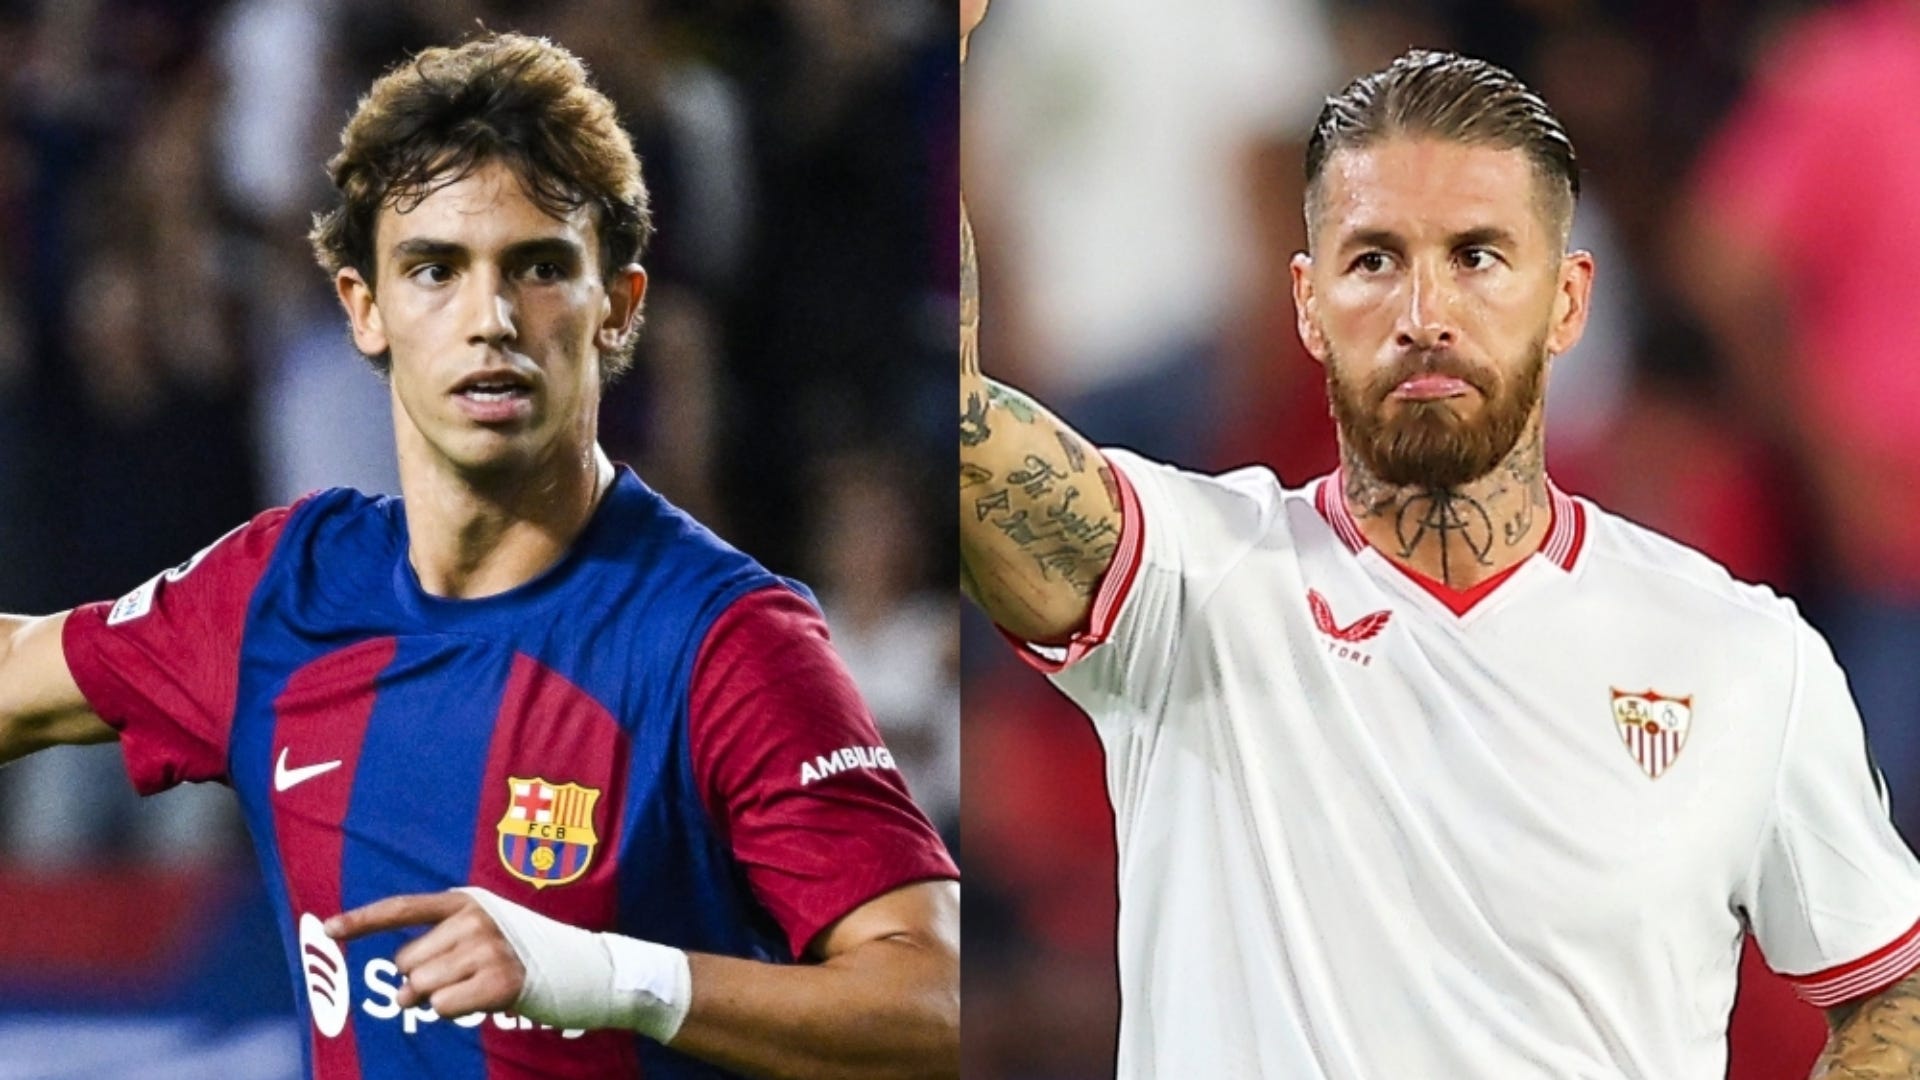 Barcelona vs Sevilla Live stream, TV channel, kick-off time and where to watch Goal UK